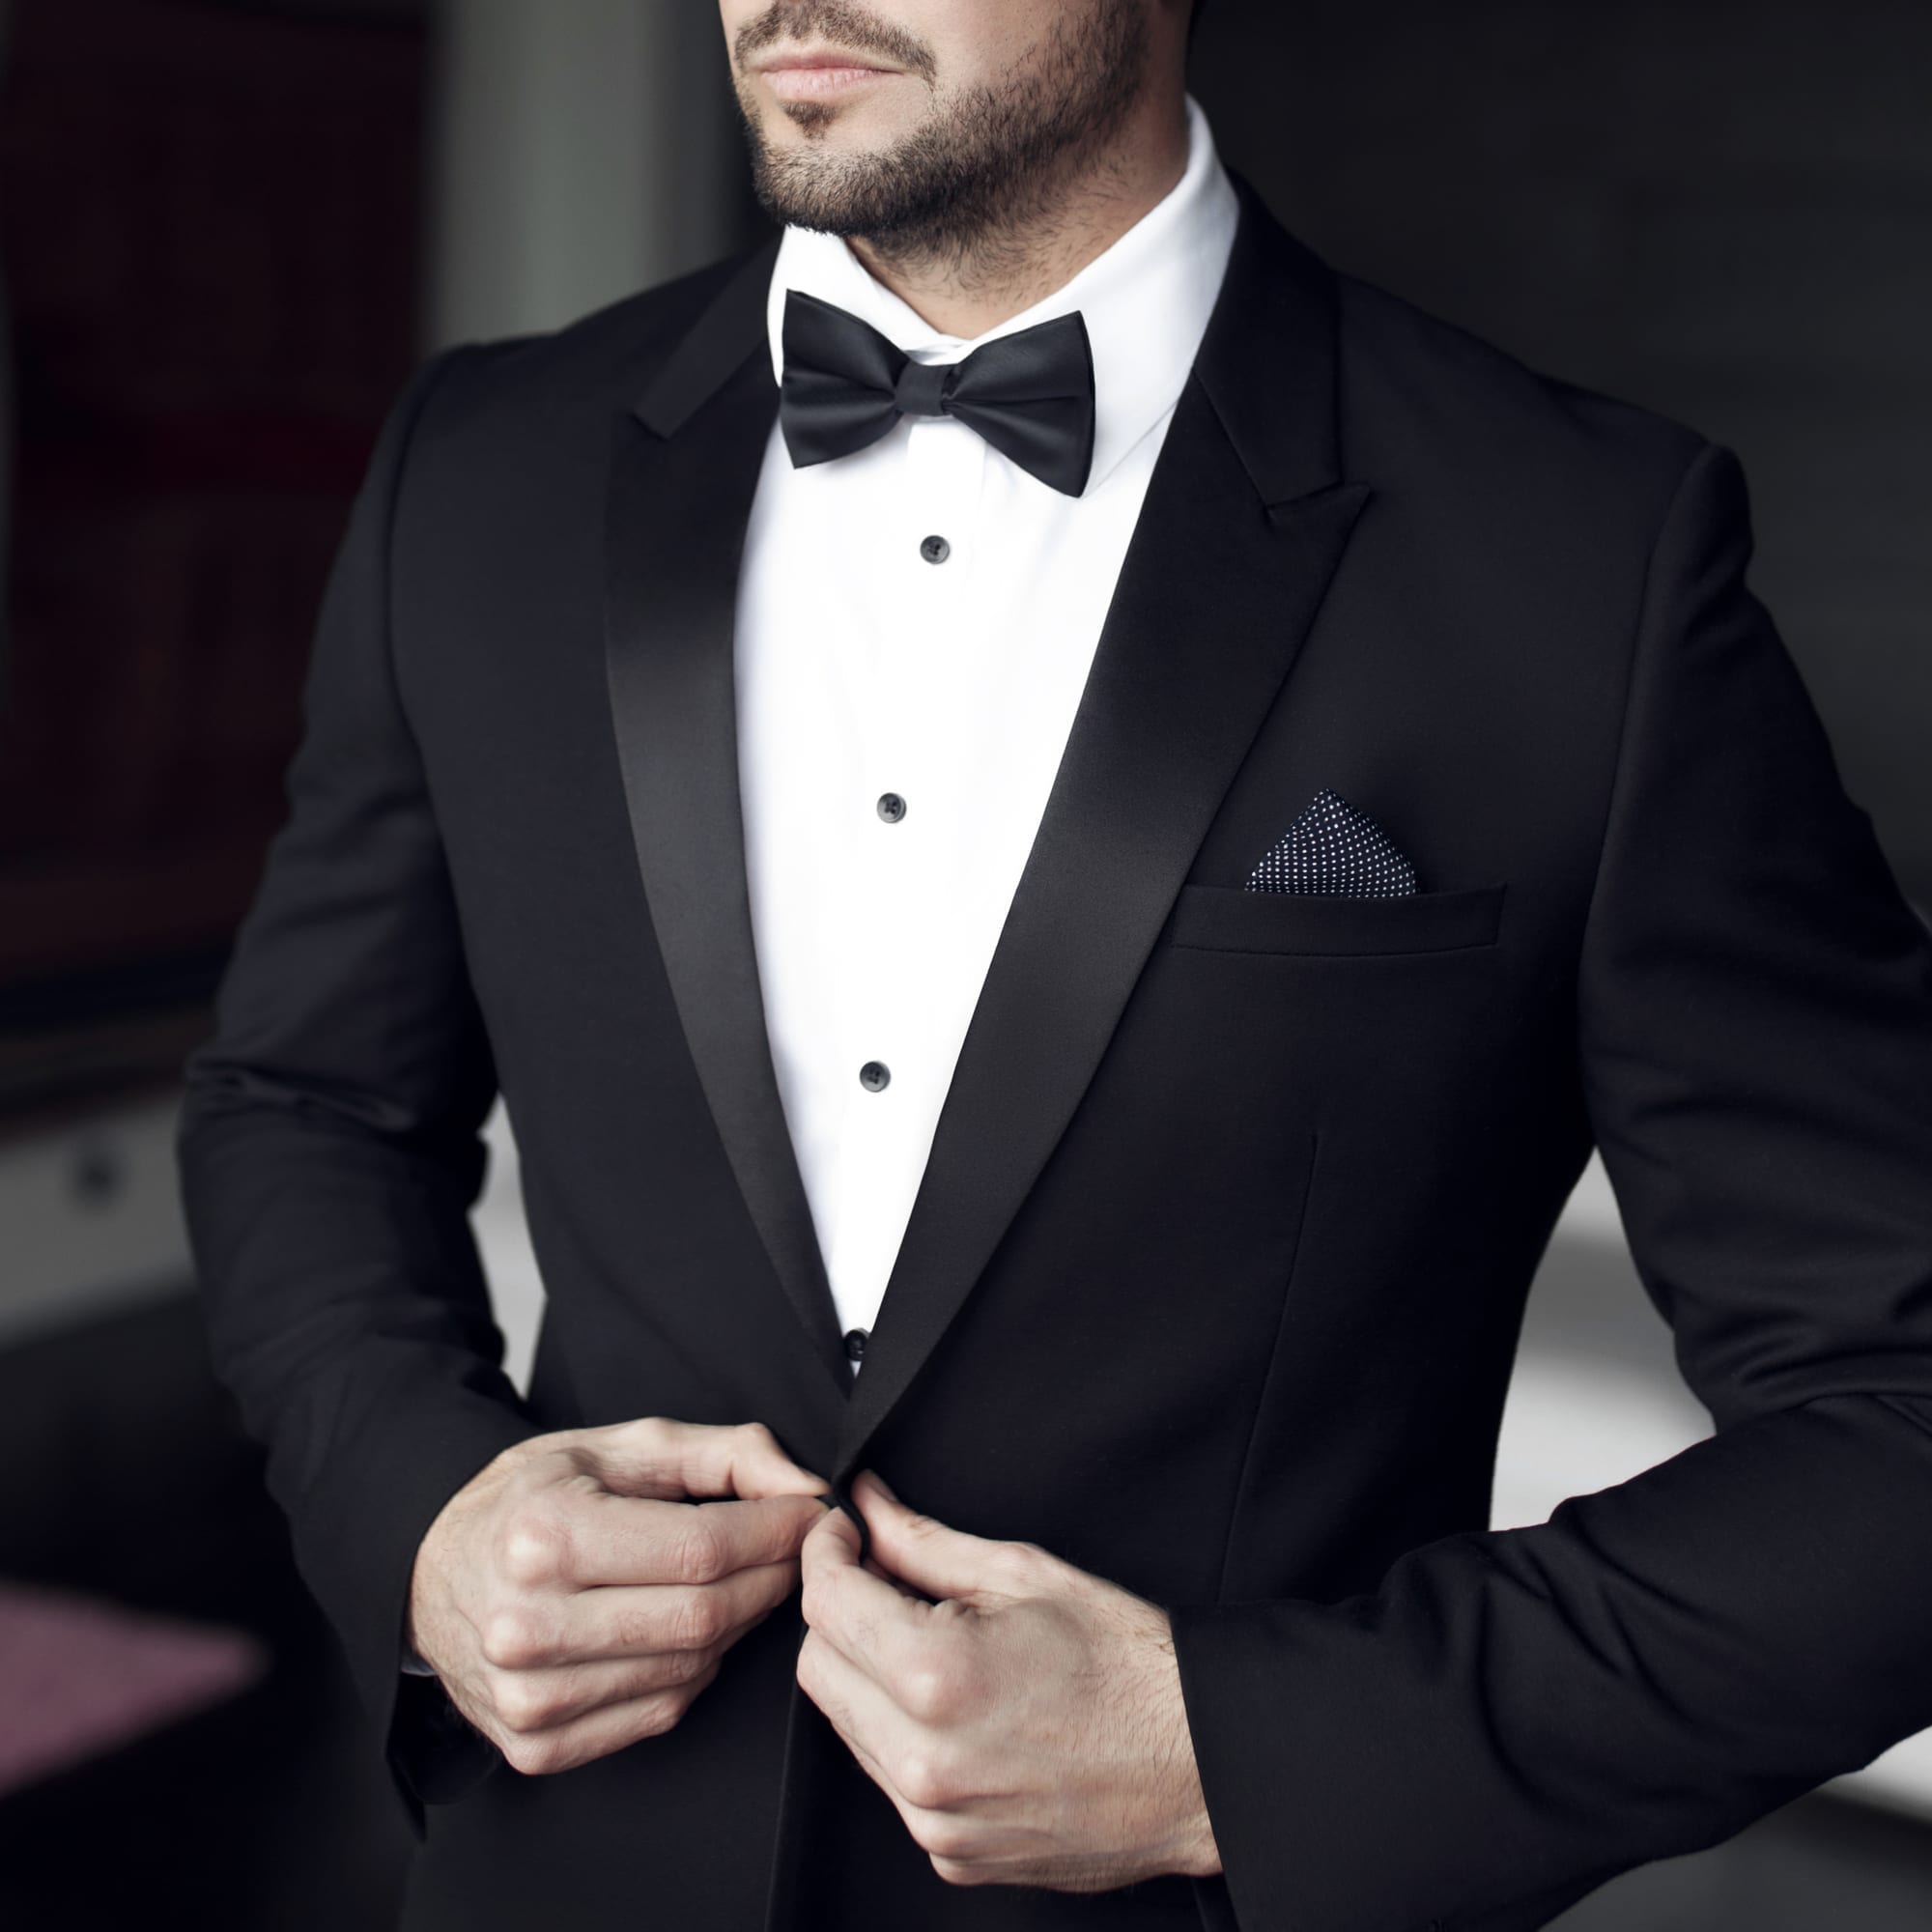 Decoding What “Black Tie Dress Code” Means